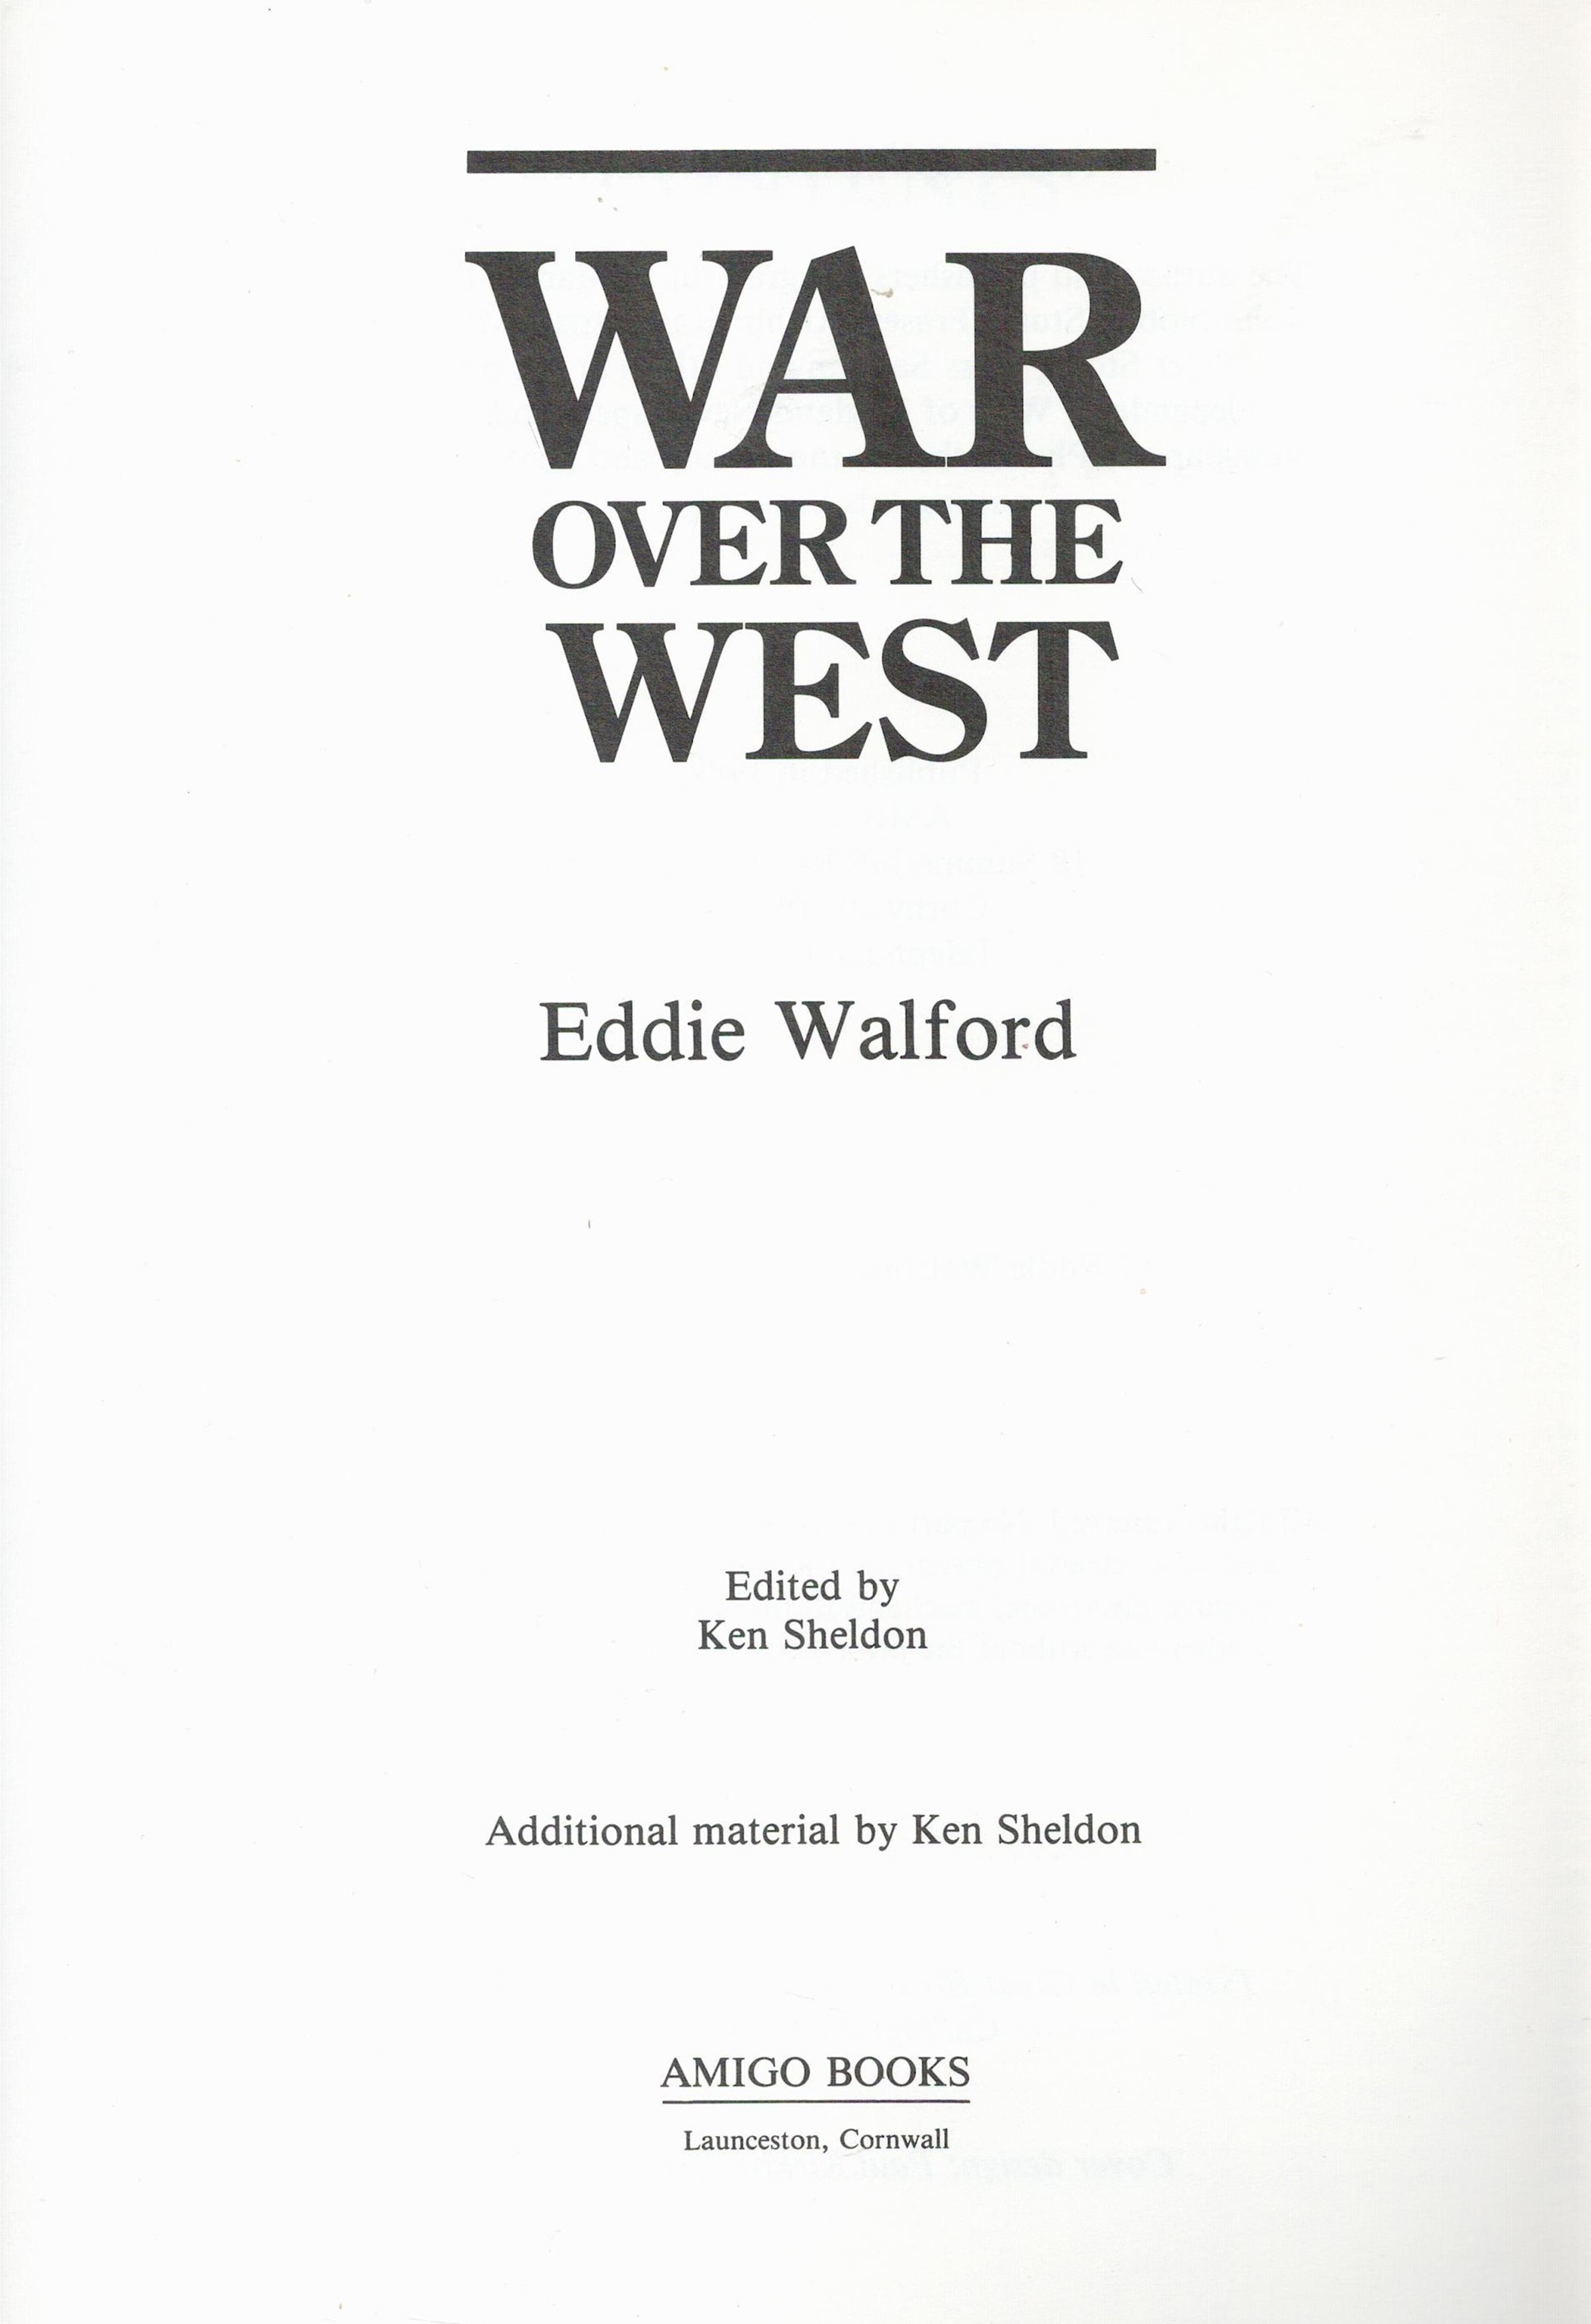 War over The West by Eddie Walford Softback Book 1989 First Edition published by Amigo Books some - Image 4 of 9